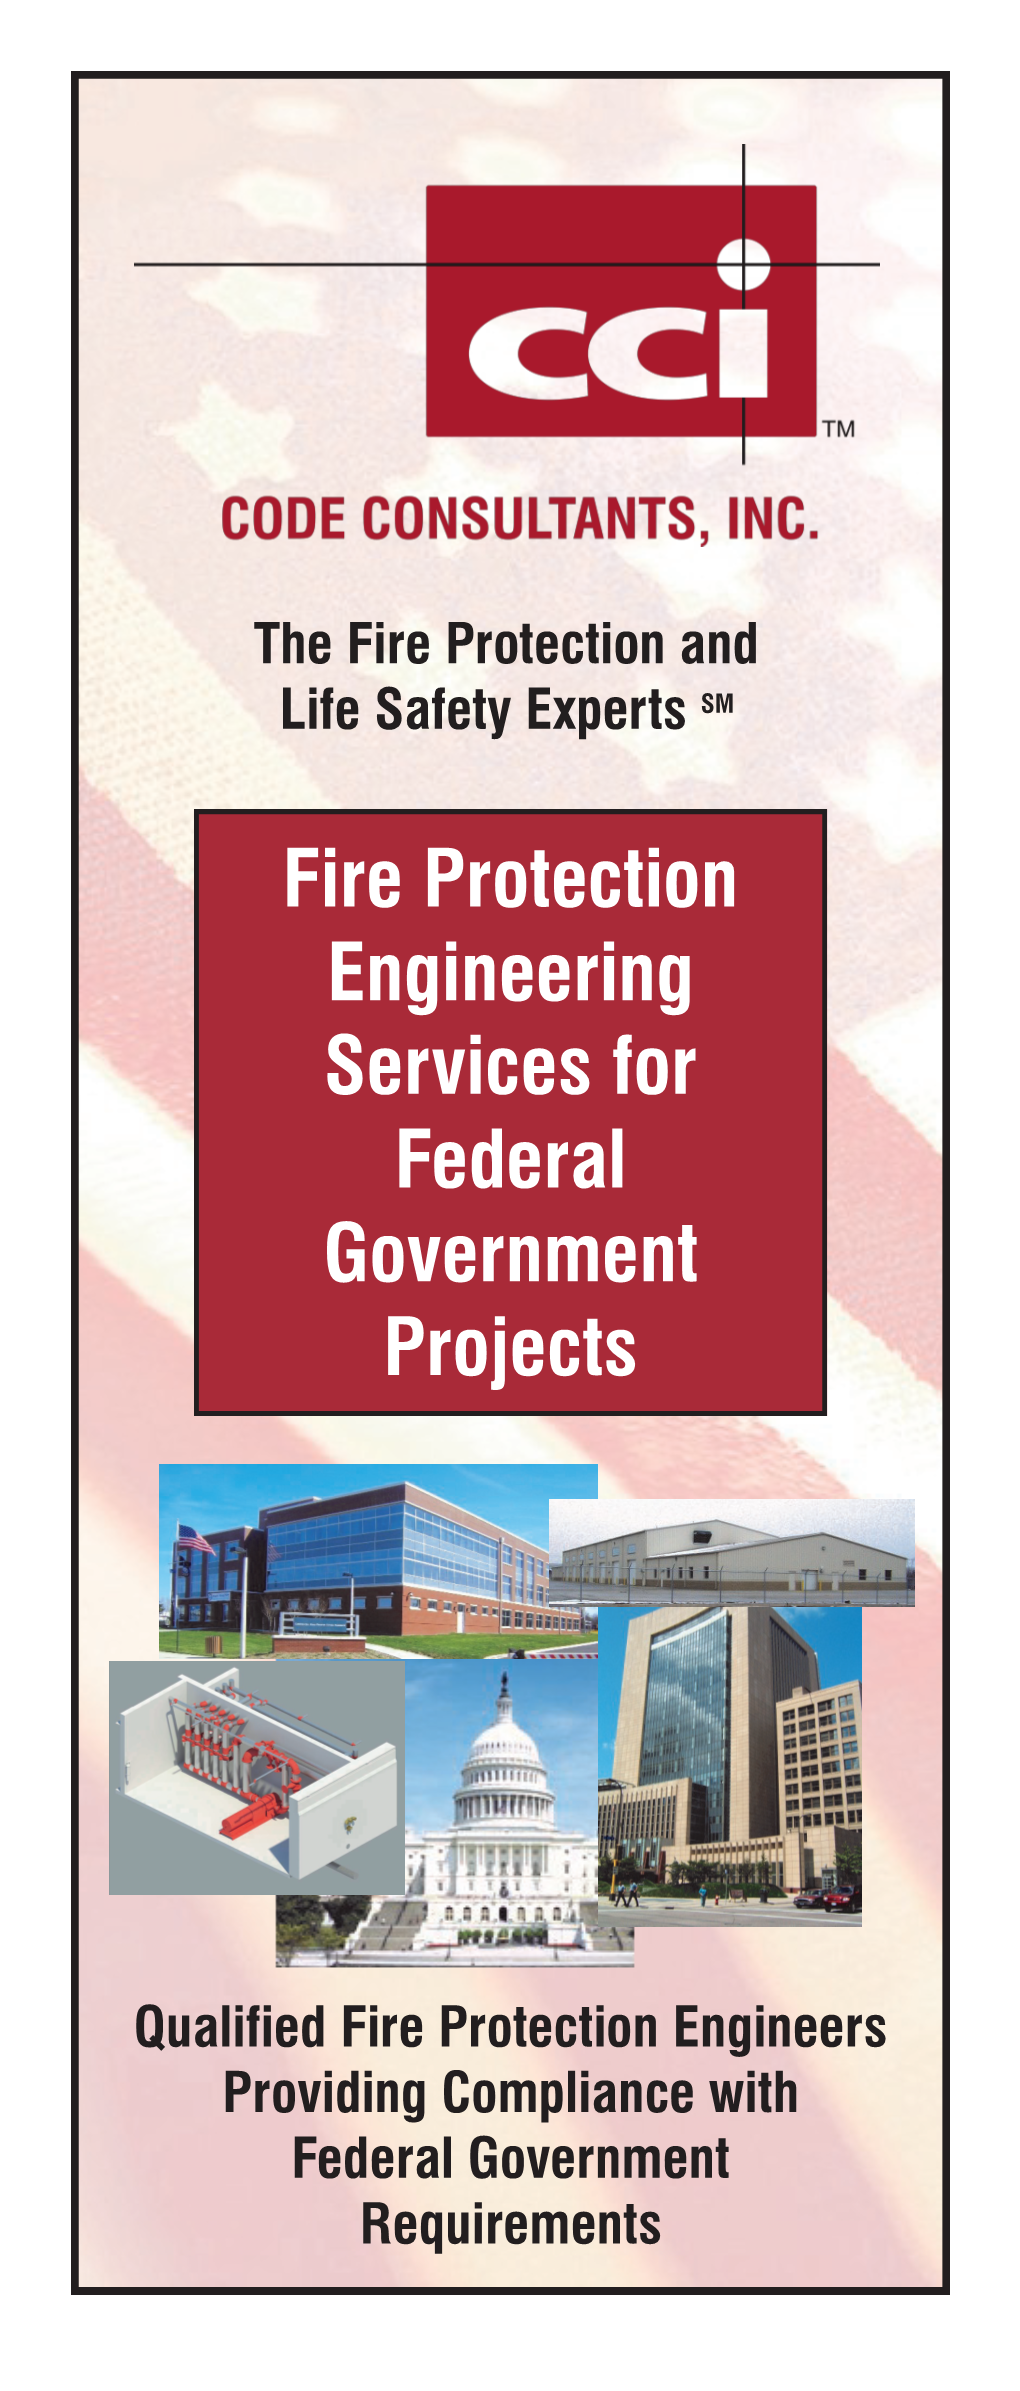 Fire Protection Engineering Services for Federal Government Projects